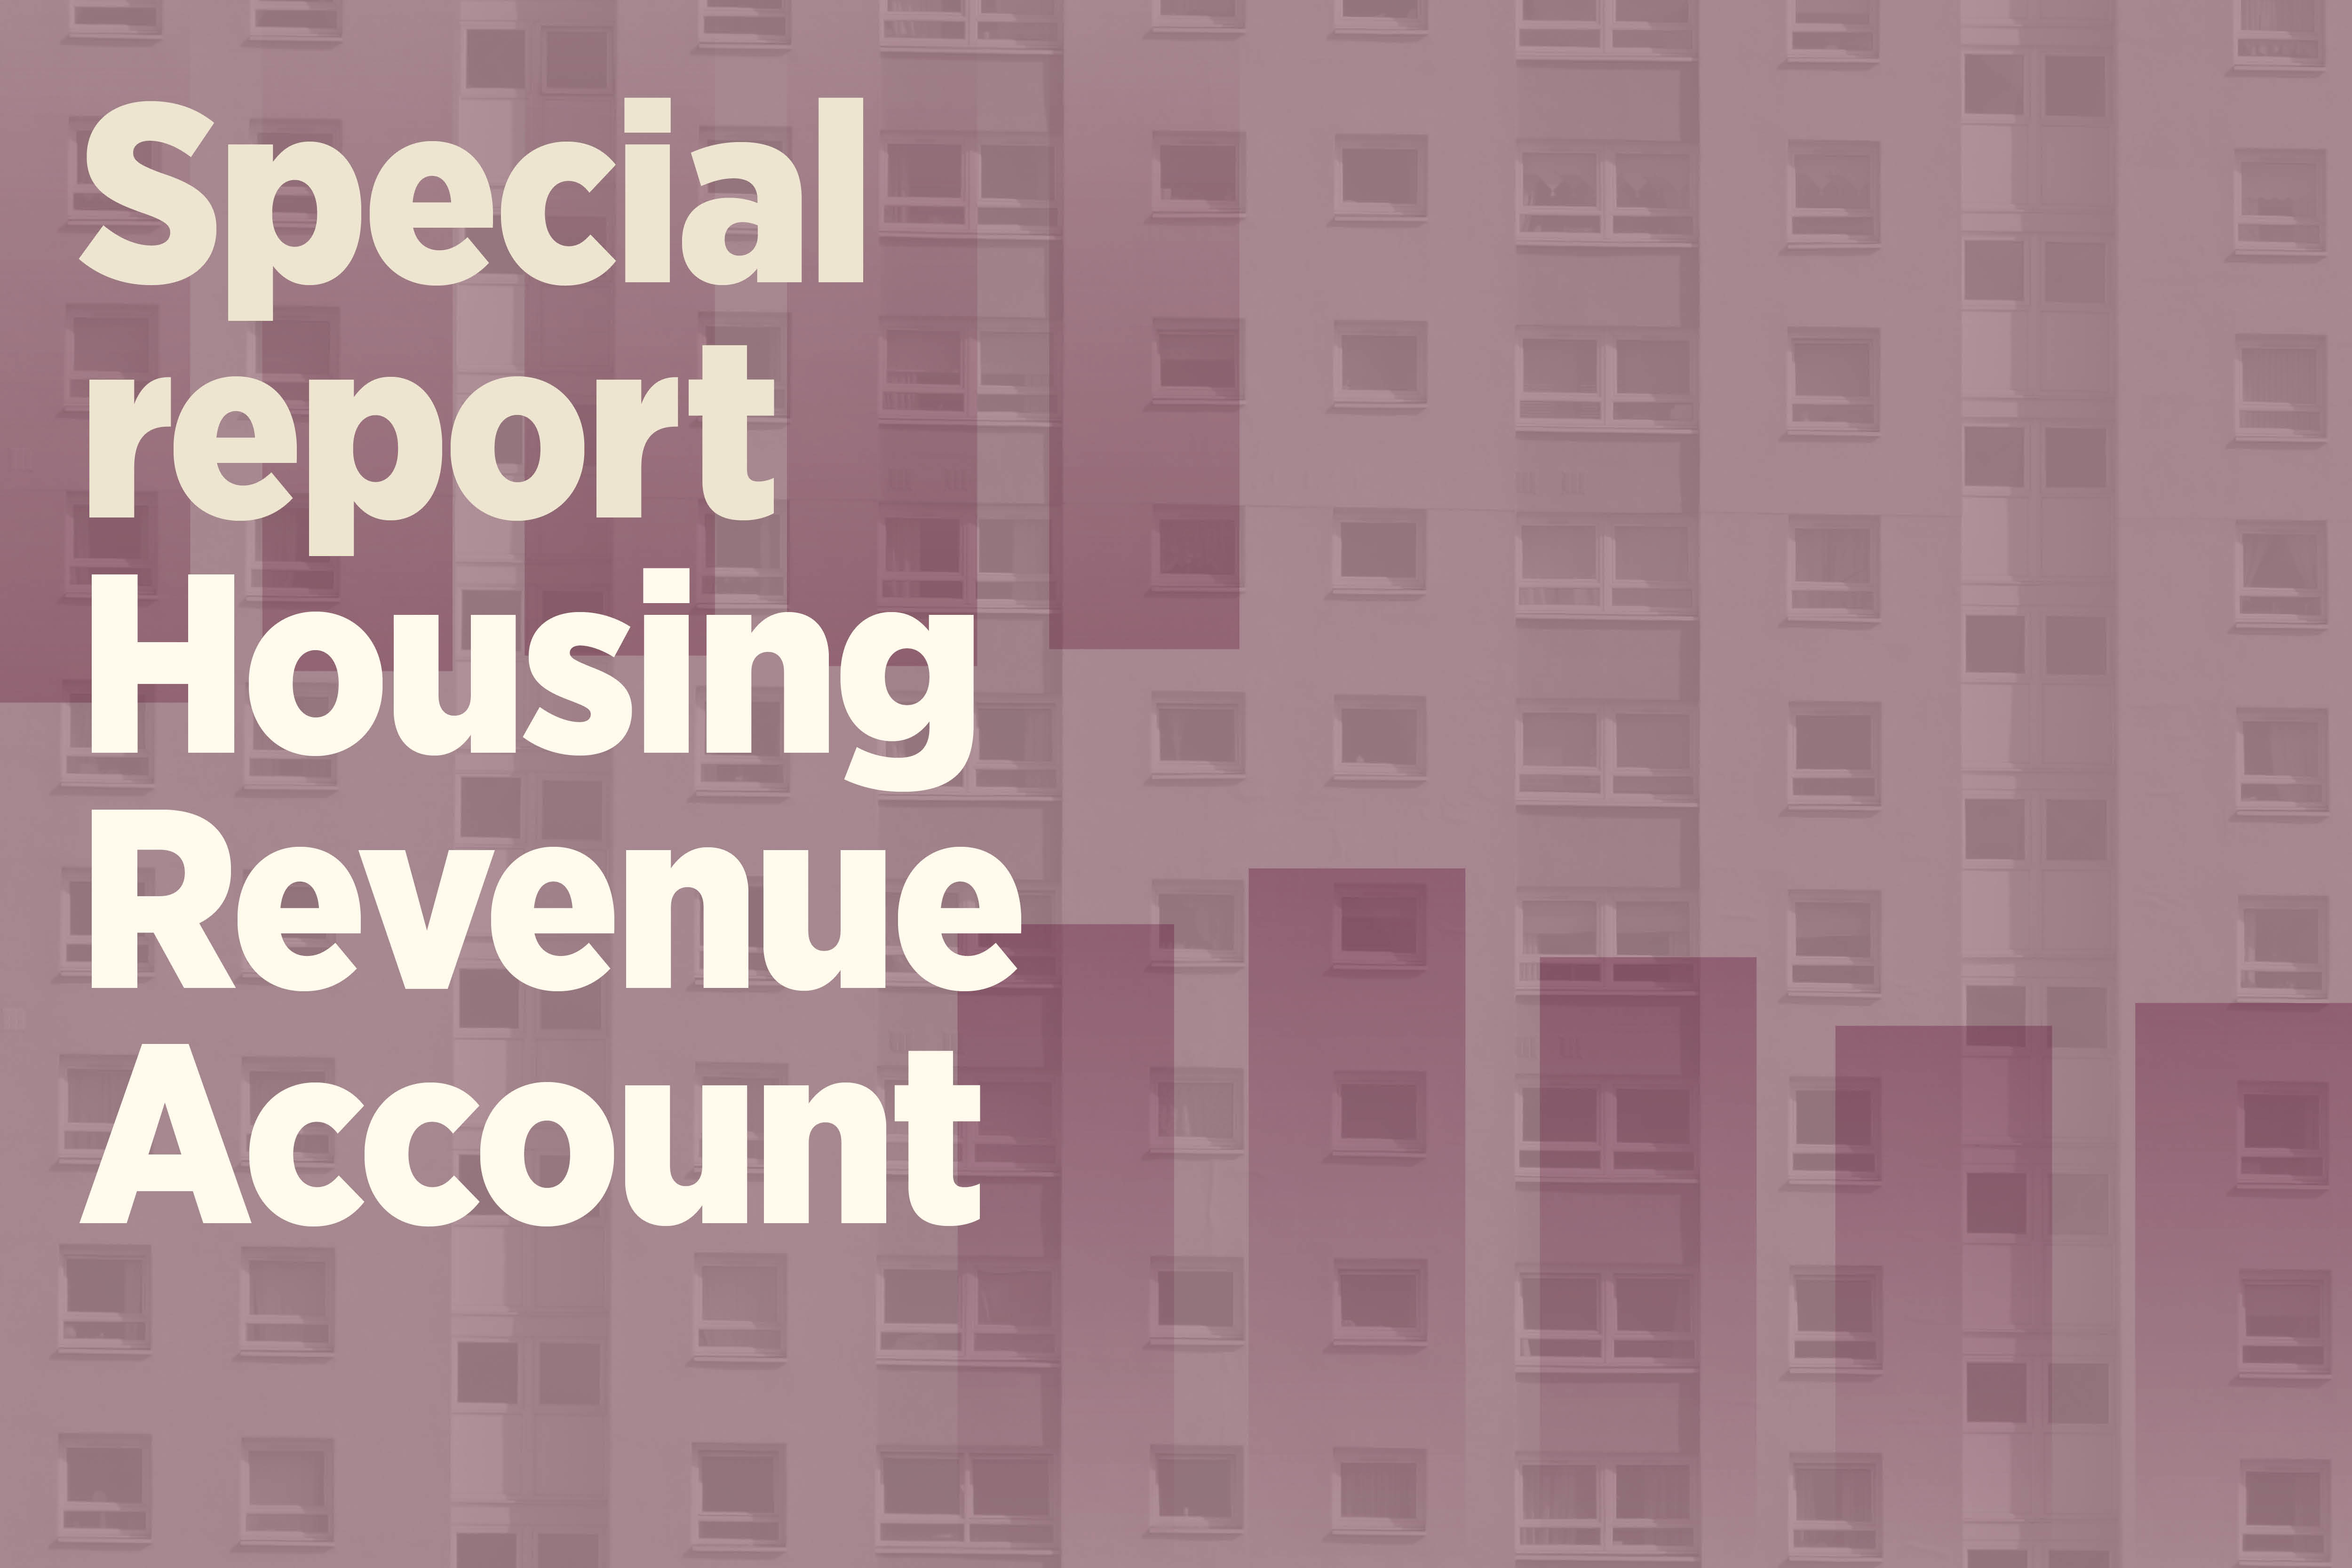 Special report: four key themes in the Housing Revenue Account